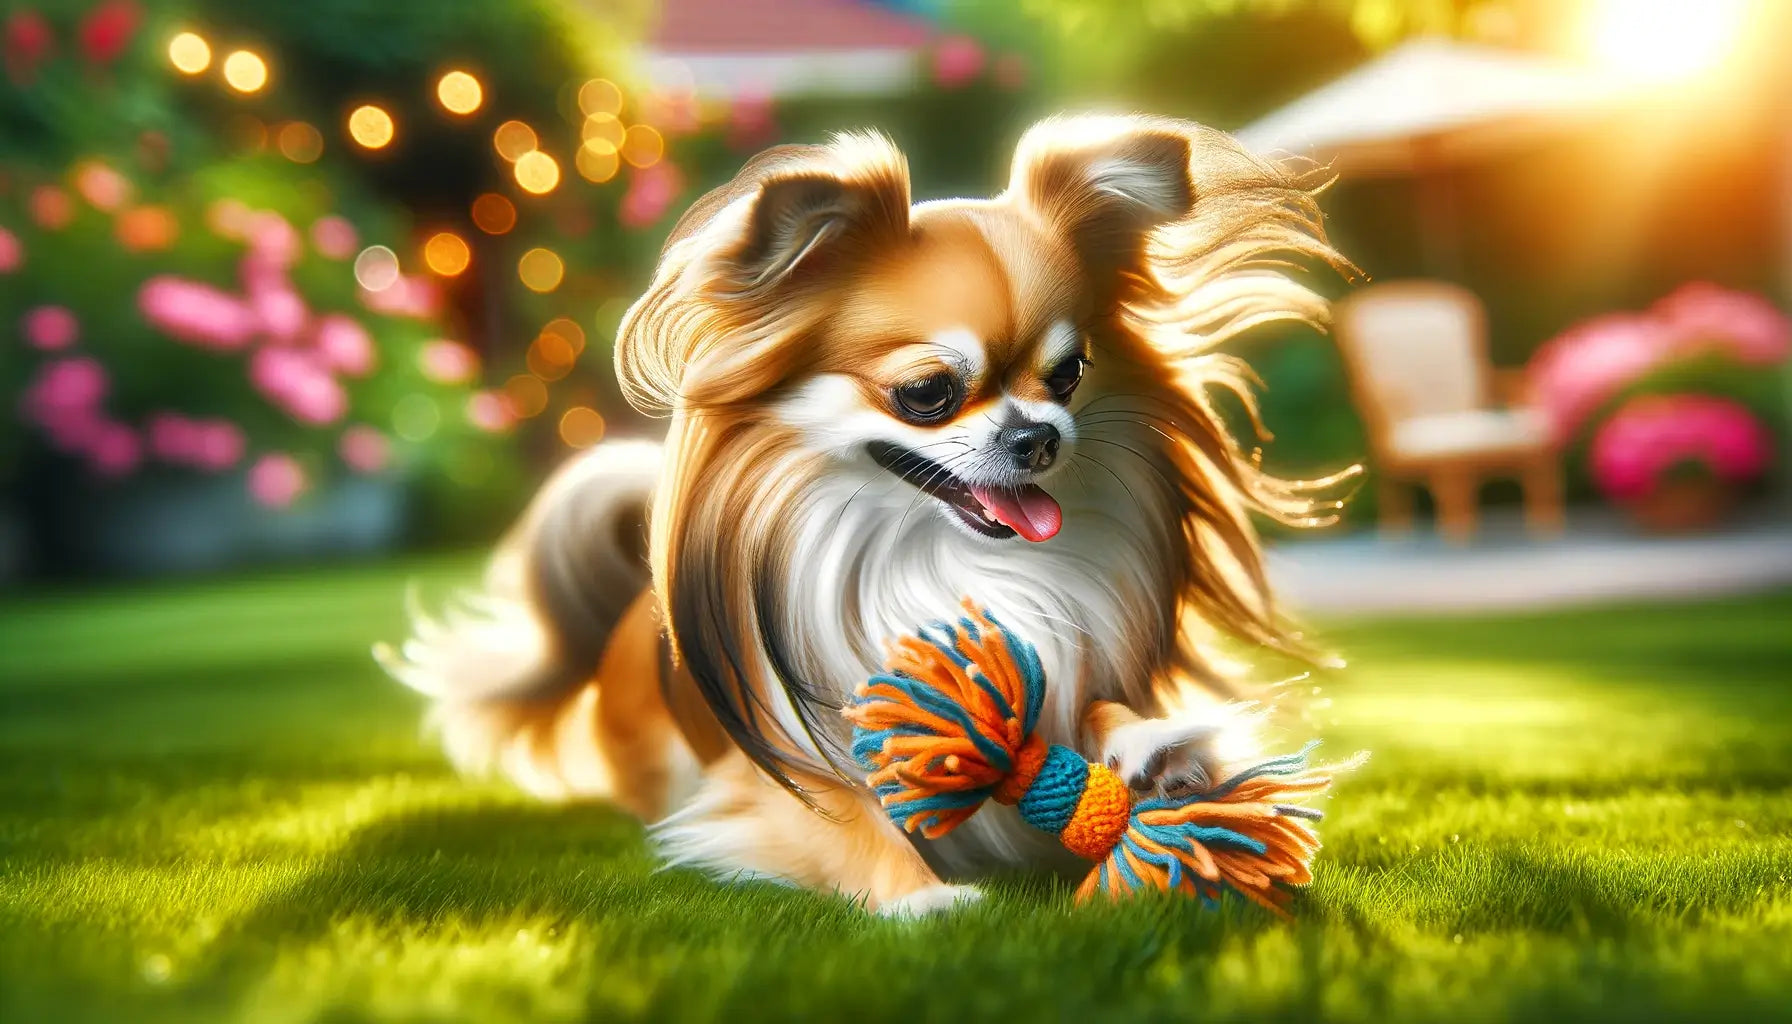 Long-Haired Chihuahua engages with a toy on a grassy lawn, depicting the breed's friendly disposition and love for interaction.